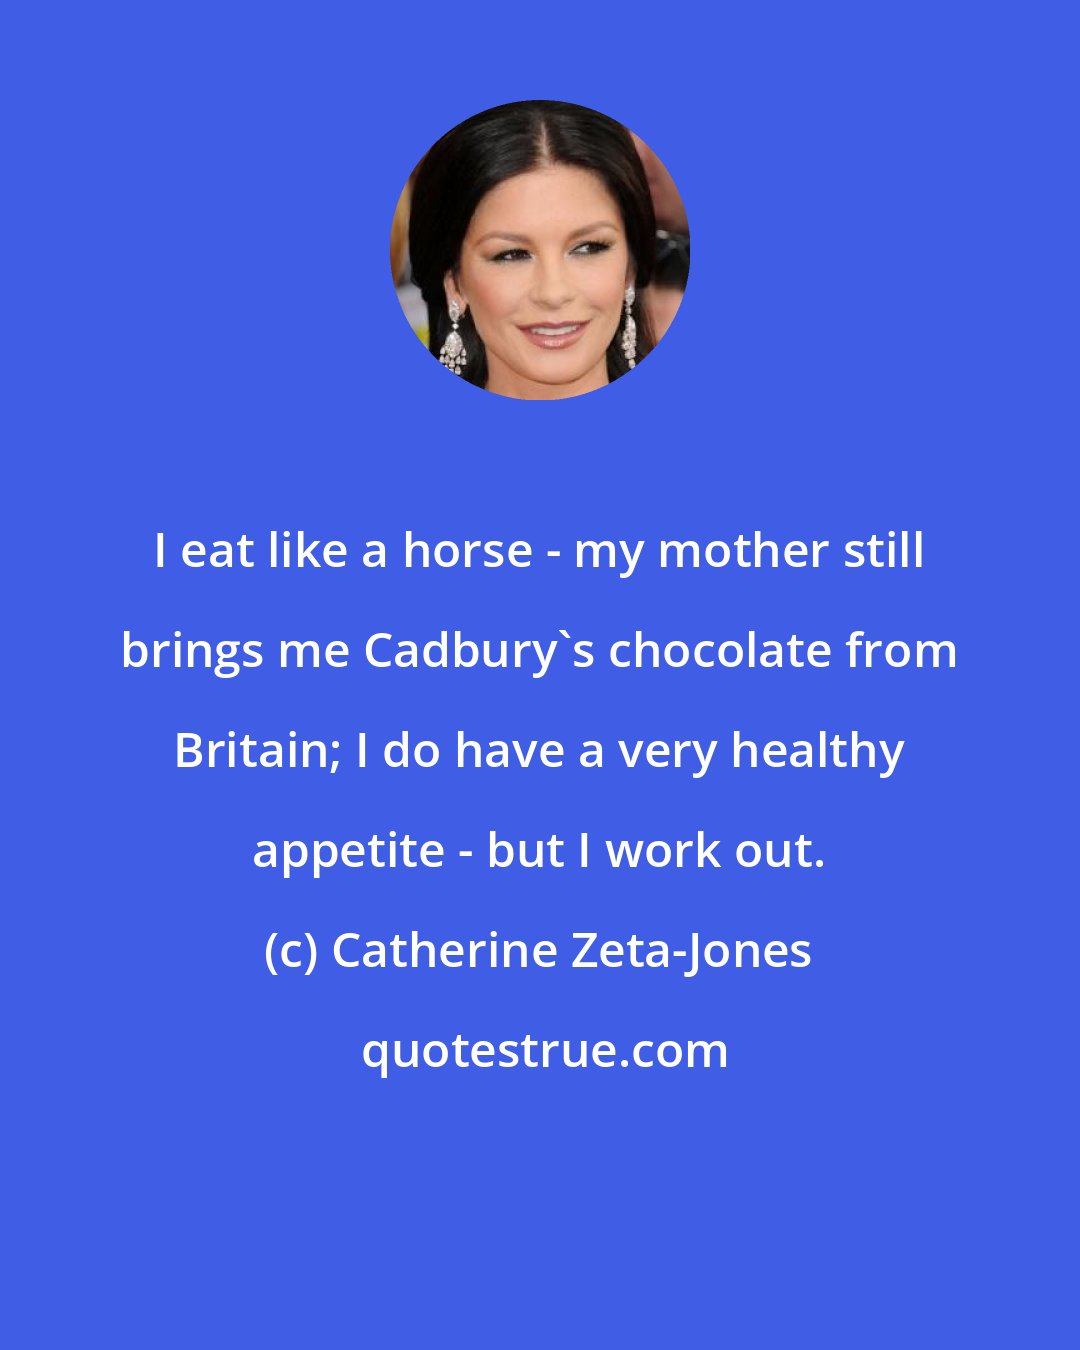 Catherine Zeta-Jones: I eat like a horse - my mother still brings me Cadbury's chocolate from Britain; I do have a very healthy appetite - but I work out.